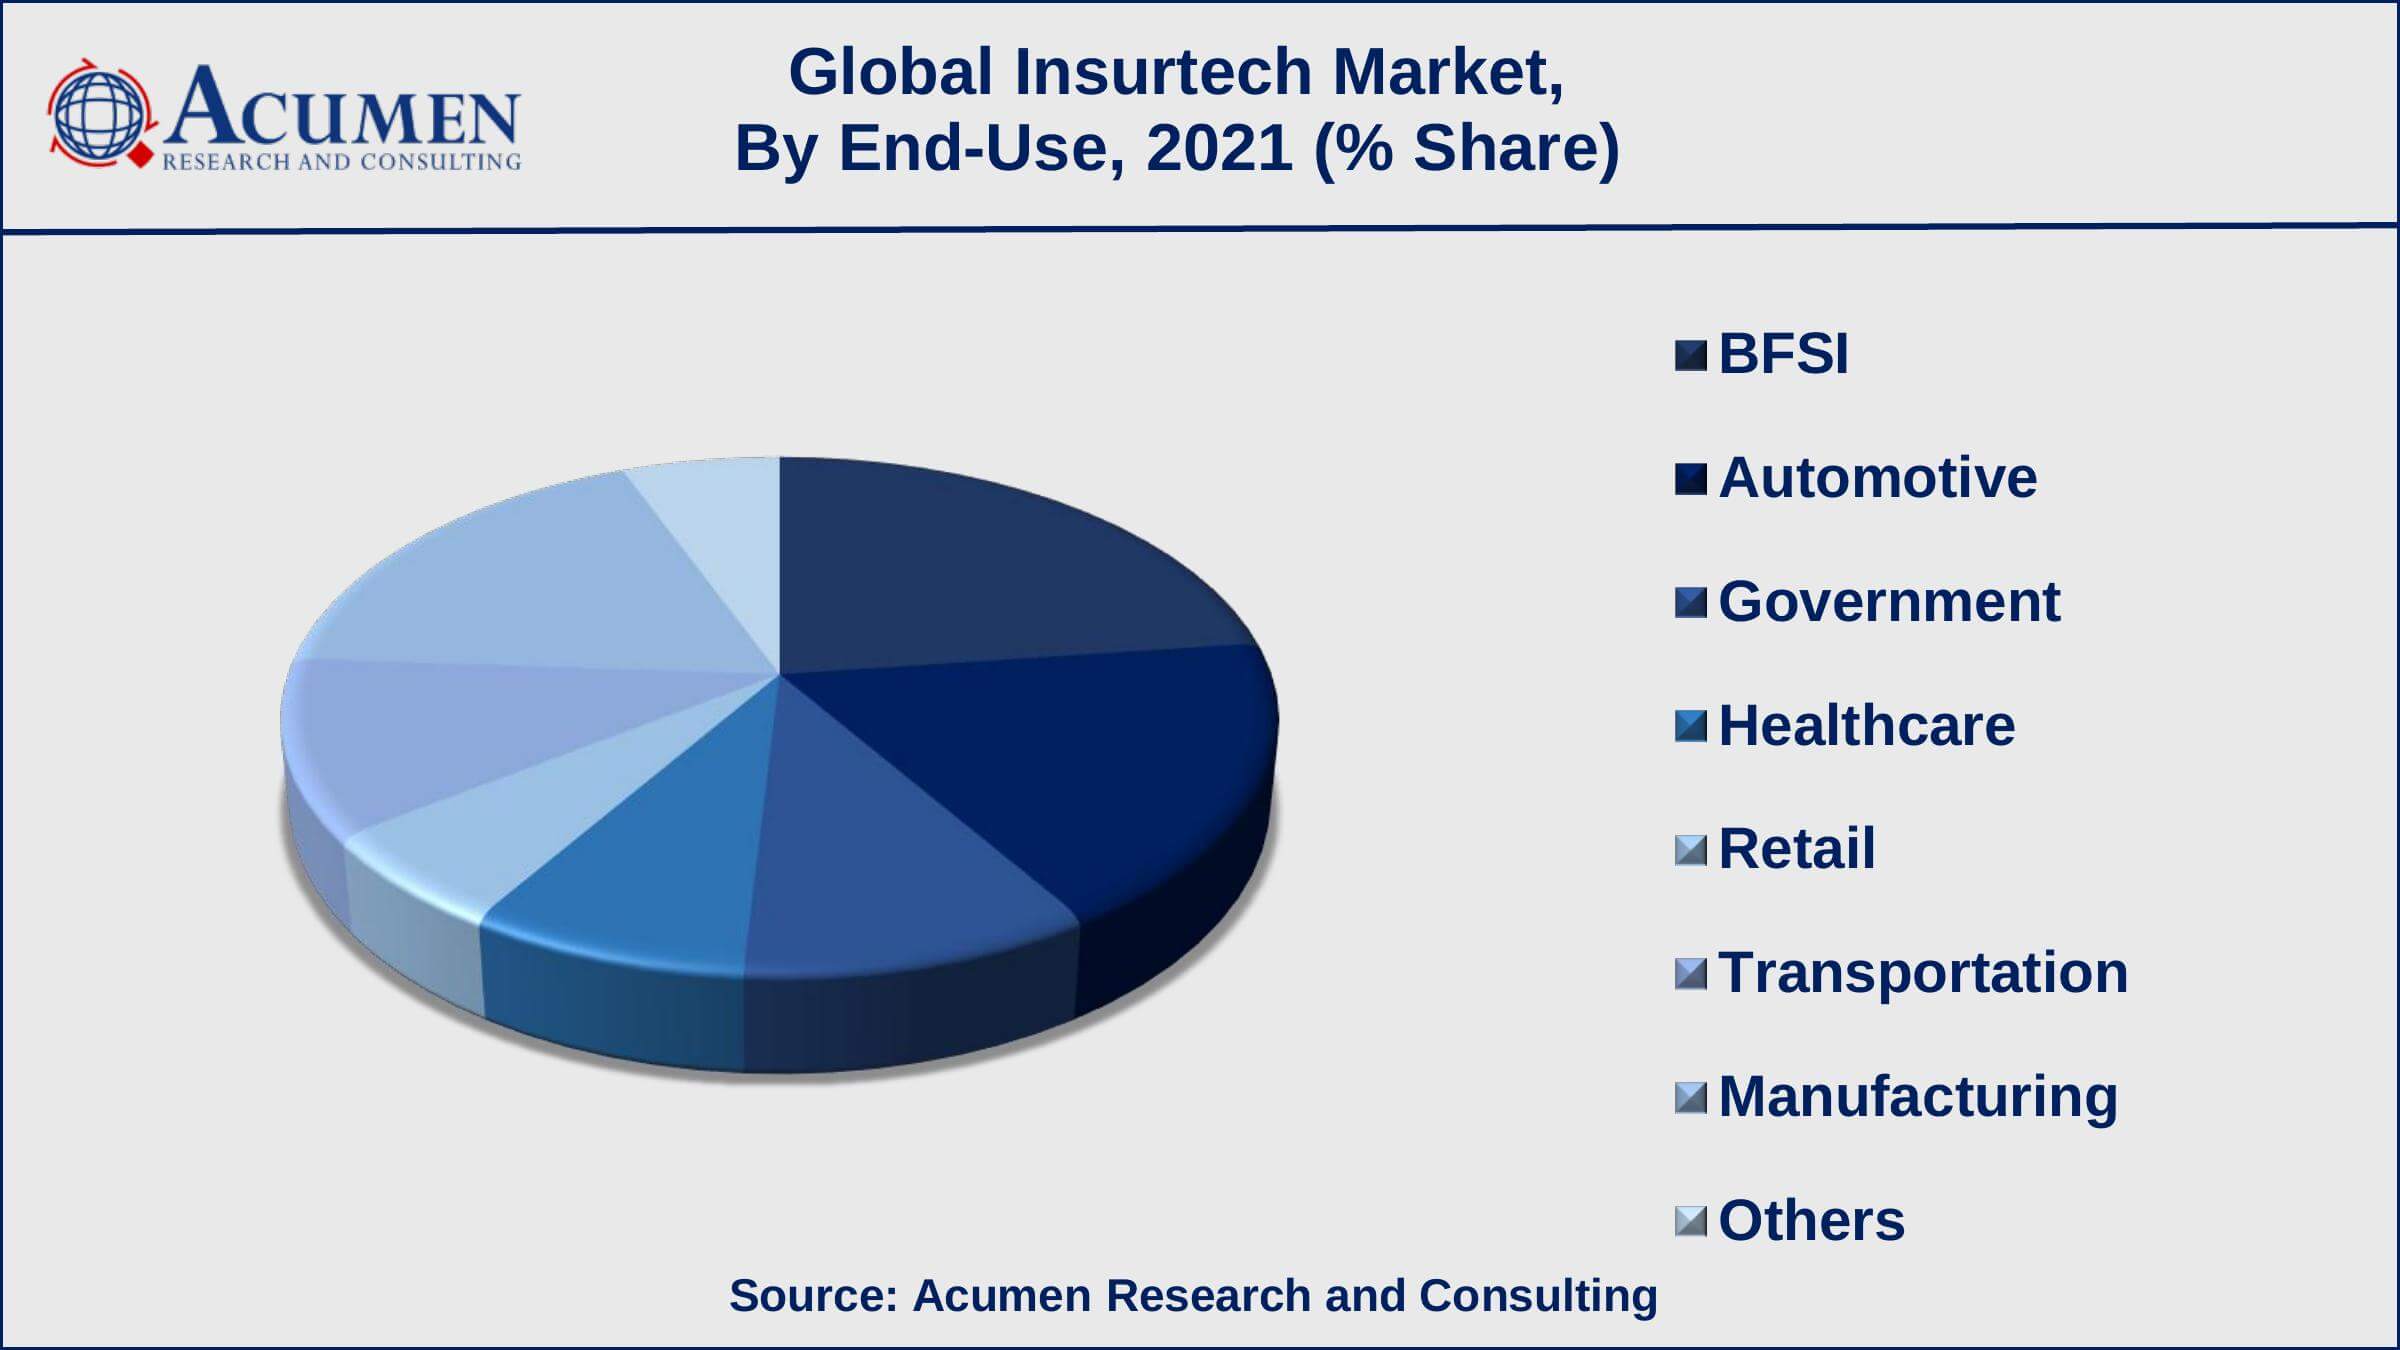 As per a recent study, India accounts for 35% of the USD 3.66 billion invested in insurtech ventures nationwide